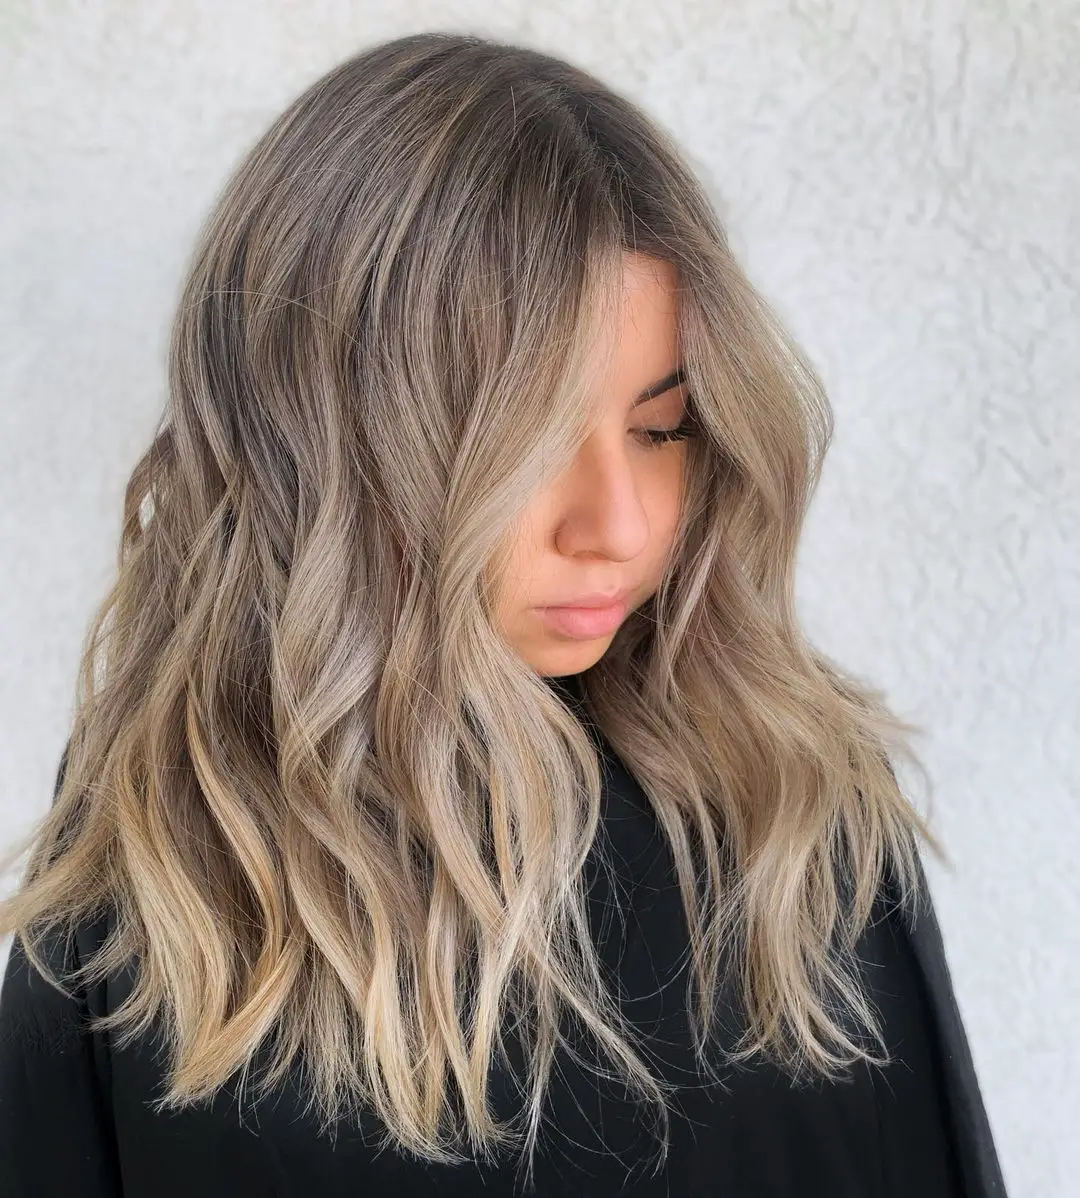 20-best-hairstyles-for-hispanic-women-with-blonde-hair Shoulder Length Hair with Waves and Honey Balayage